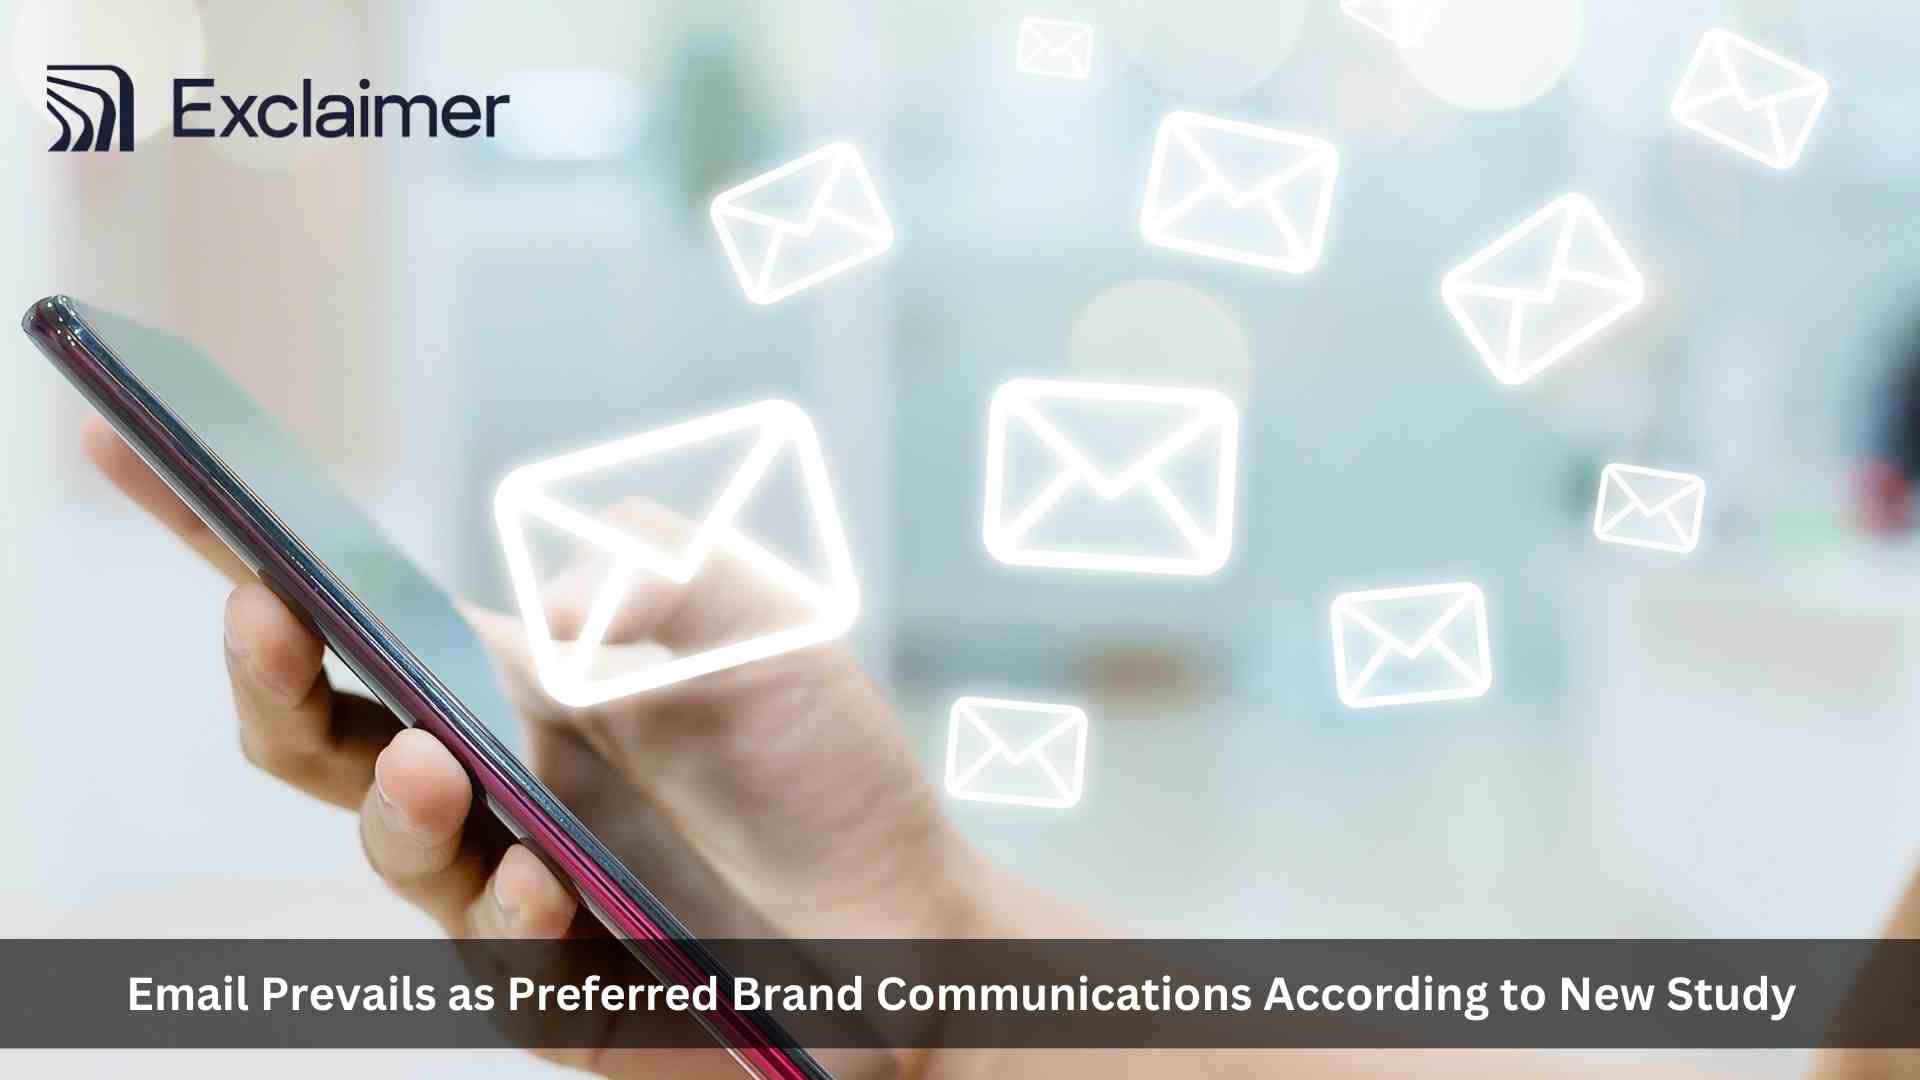 Amid Budget Cuts, Email Prevails as Preferred Brand Communications According to New Study